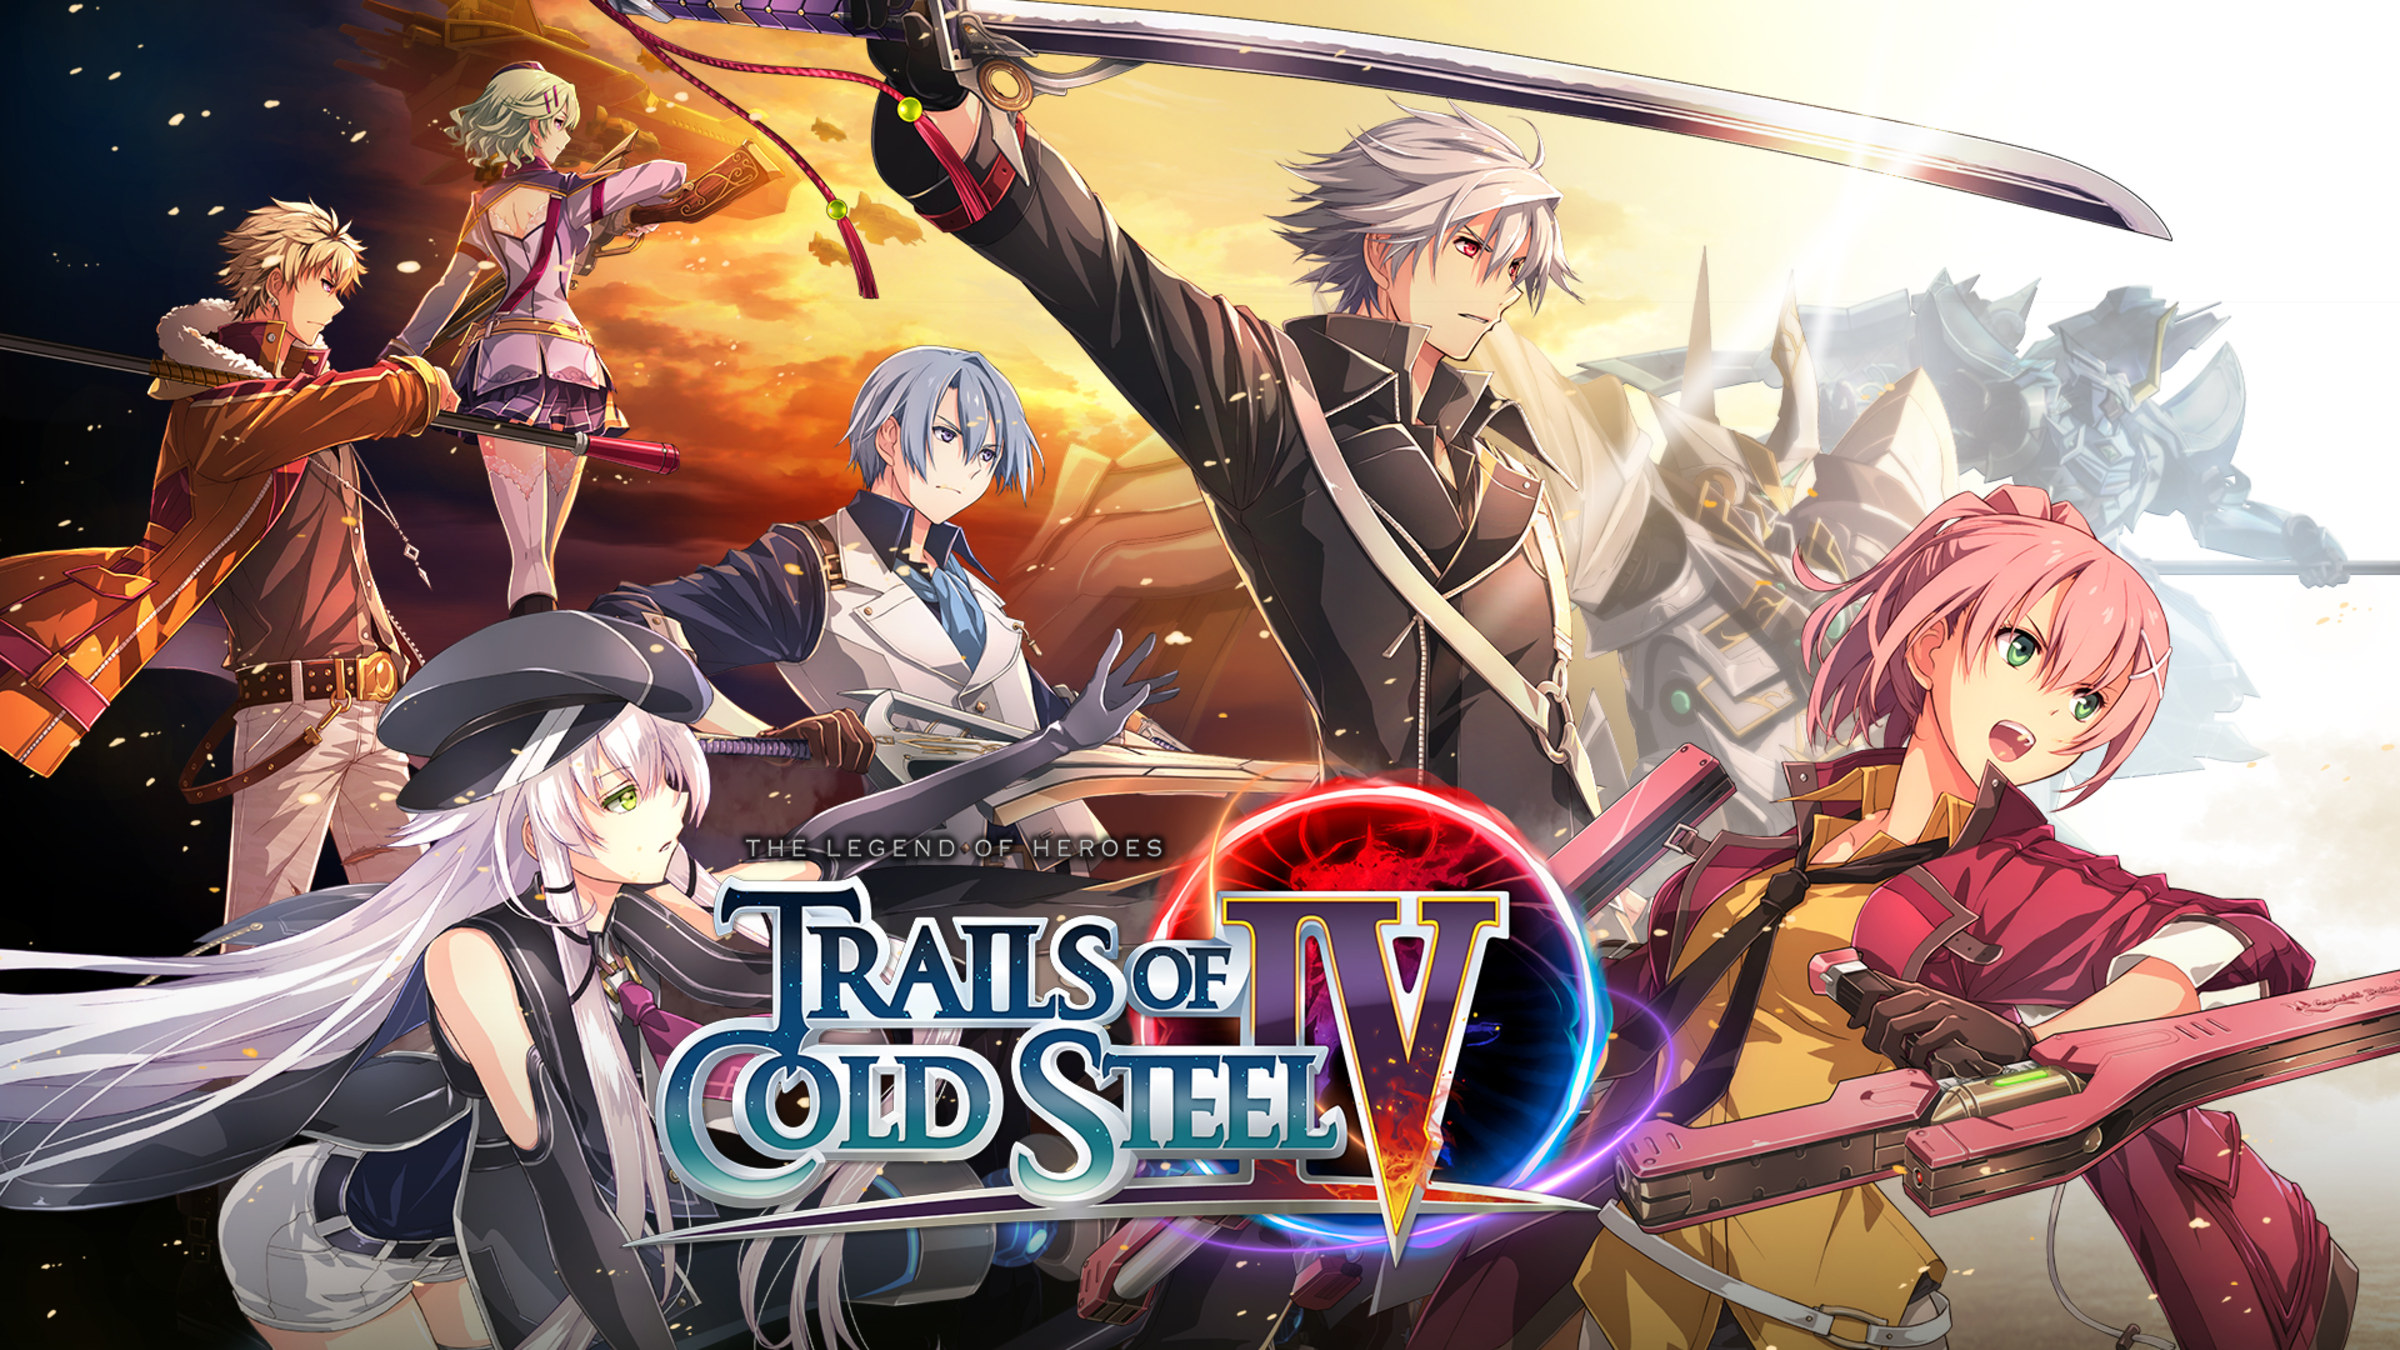 The Legend of Heroes: Trails of Cold Steel IV for Nintendo Switch